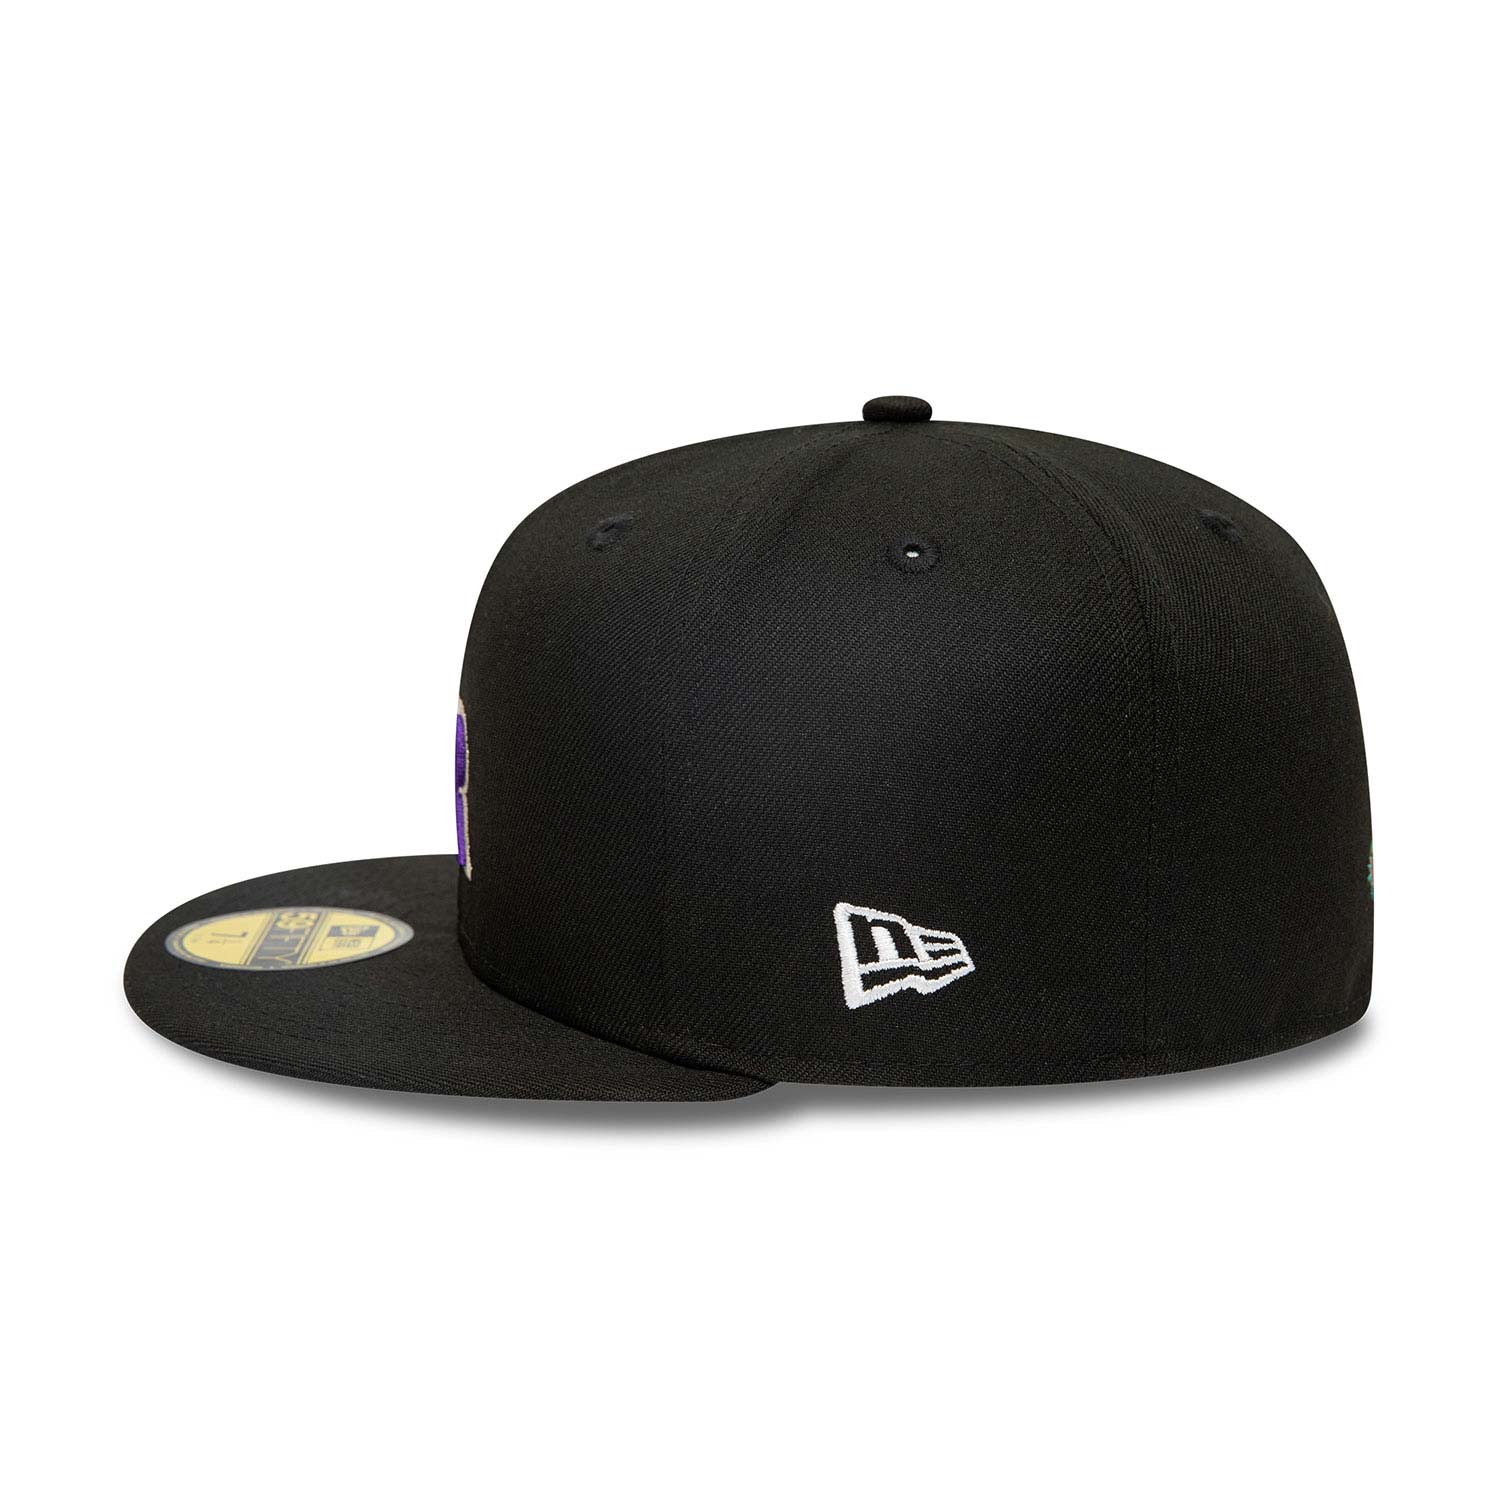 Colorado Rockies Stateview Black 59FIFTY Fitted Cap